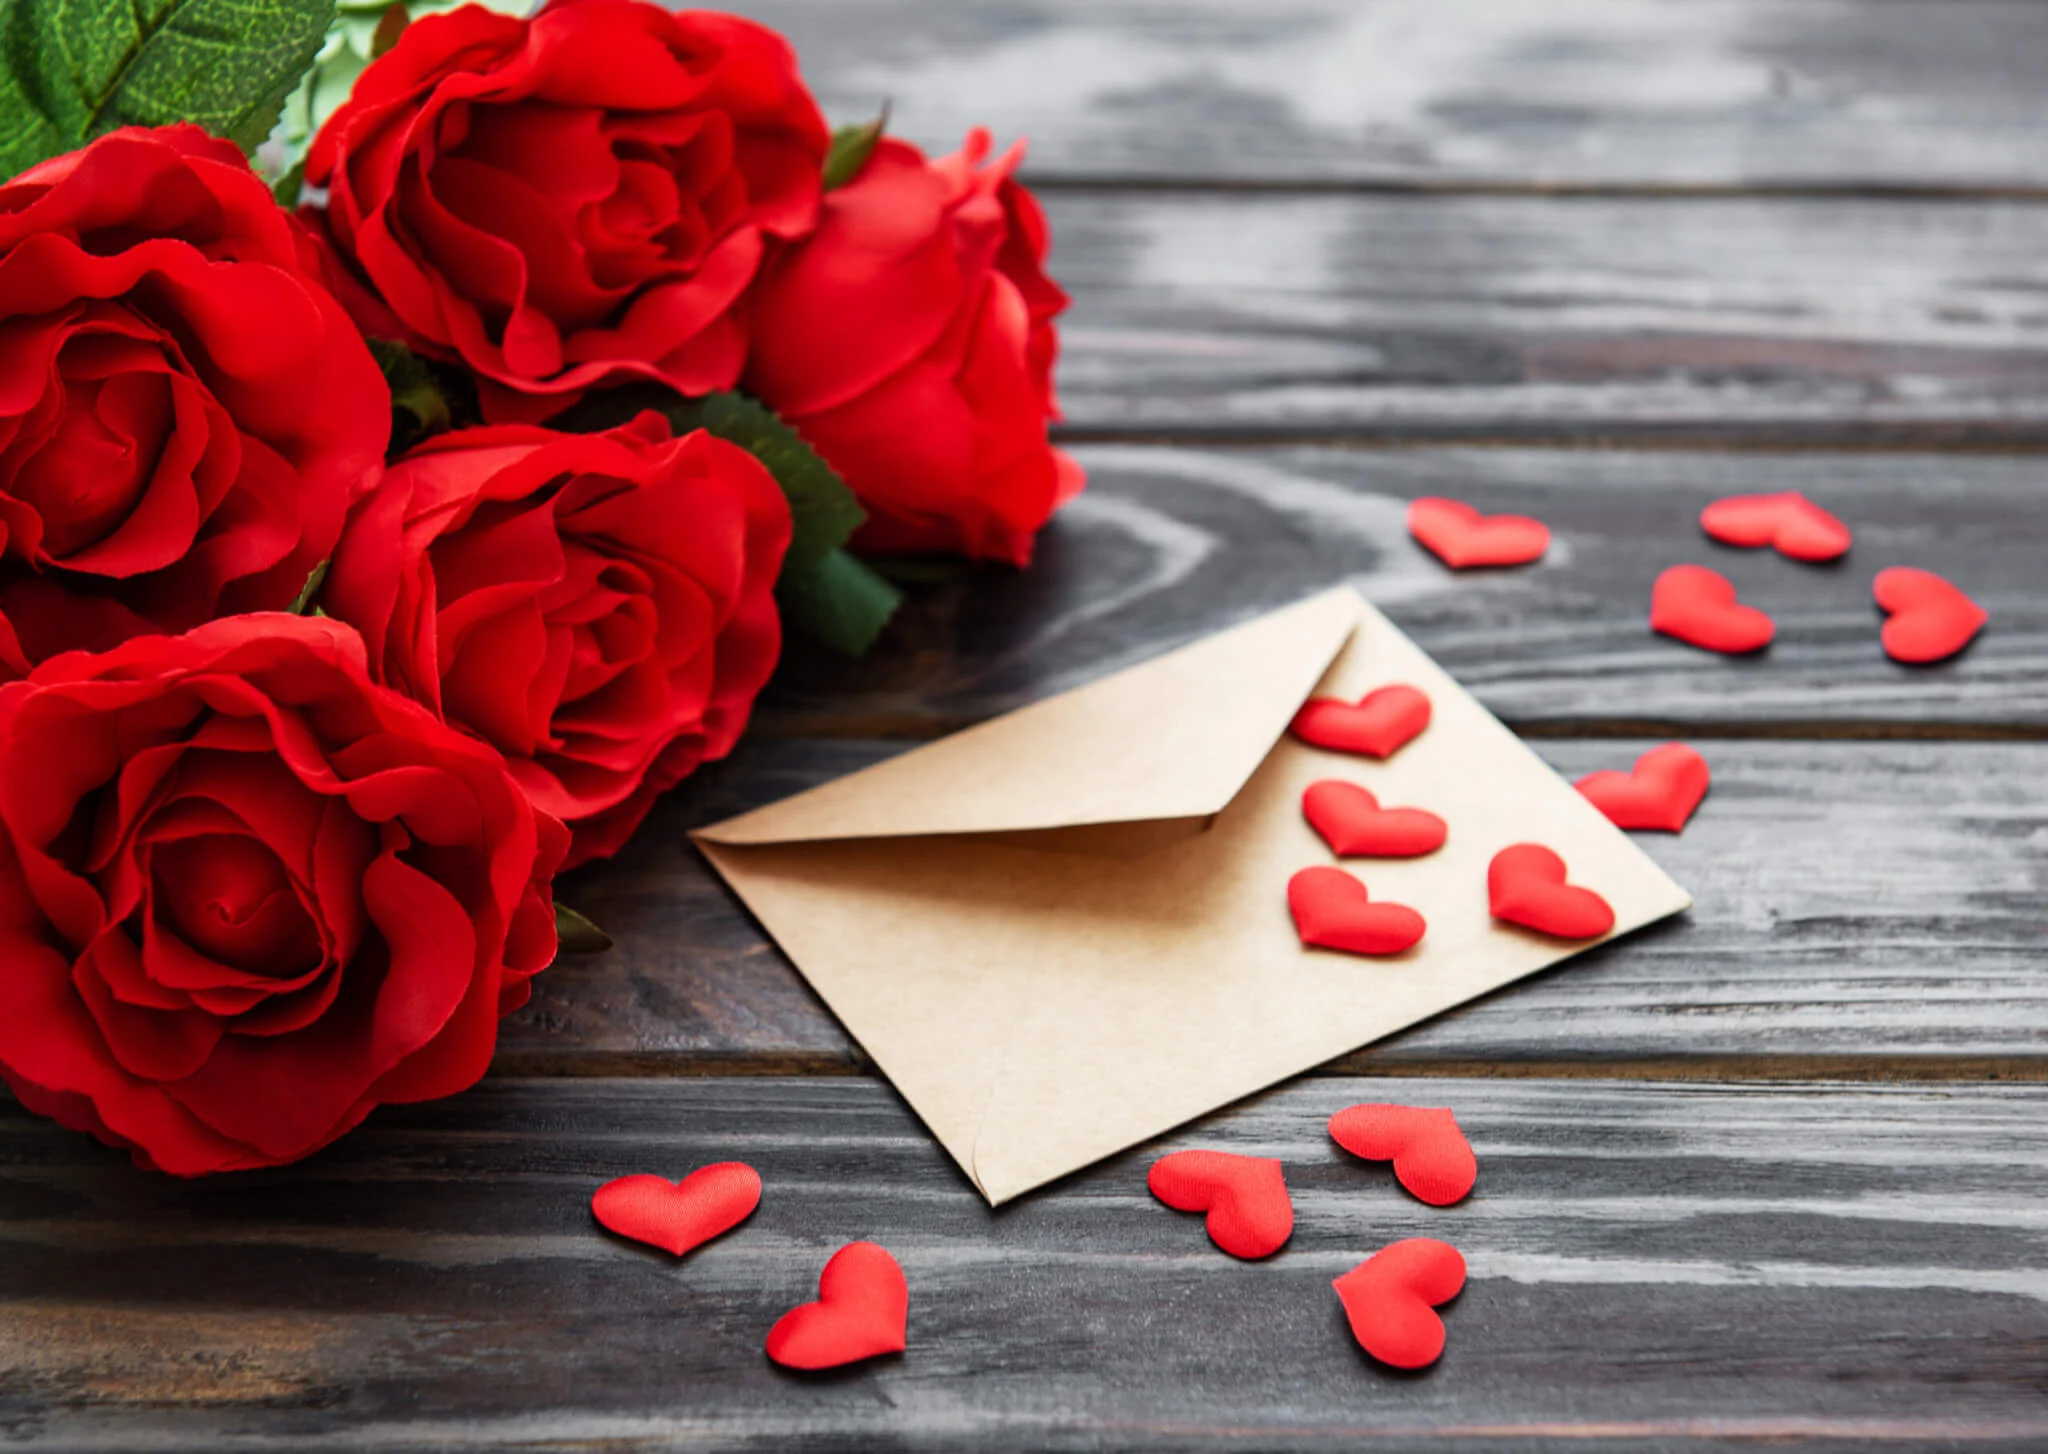 Valentine’s Day: 200 Romantic Messages To Send To Your ‘Val’